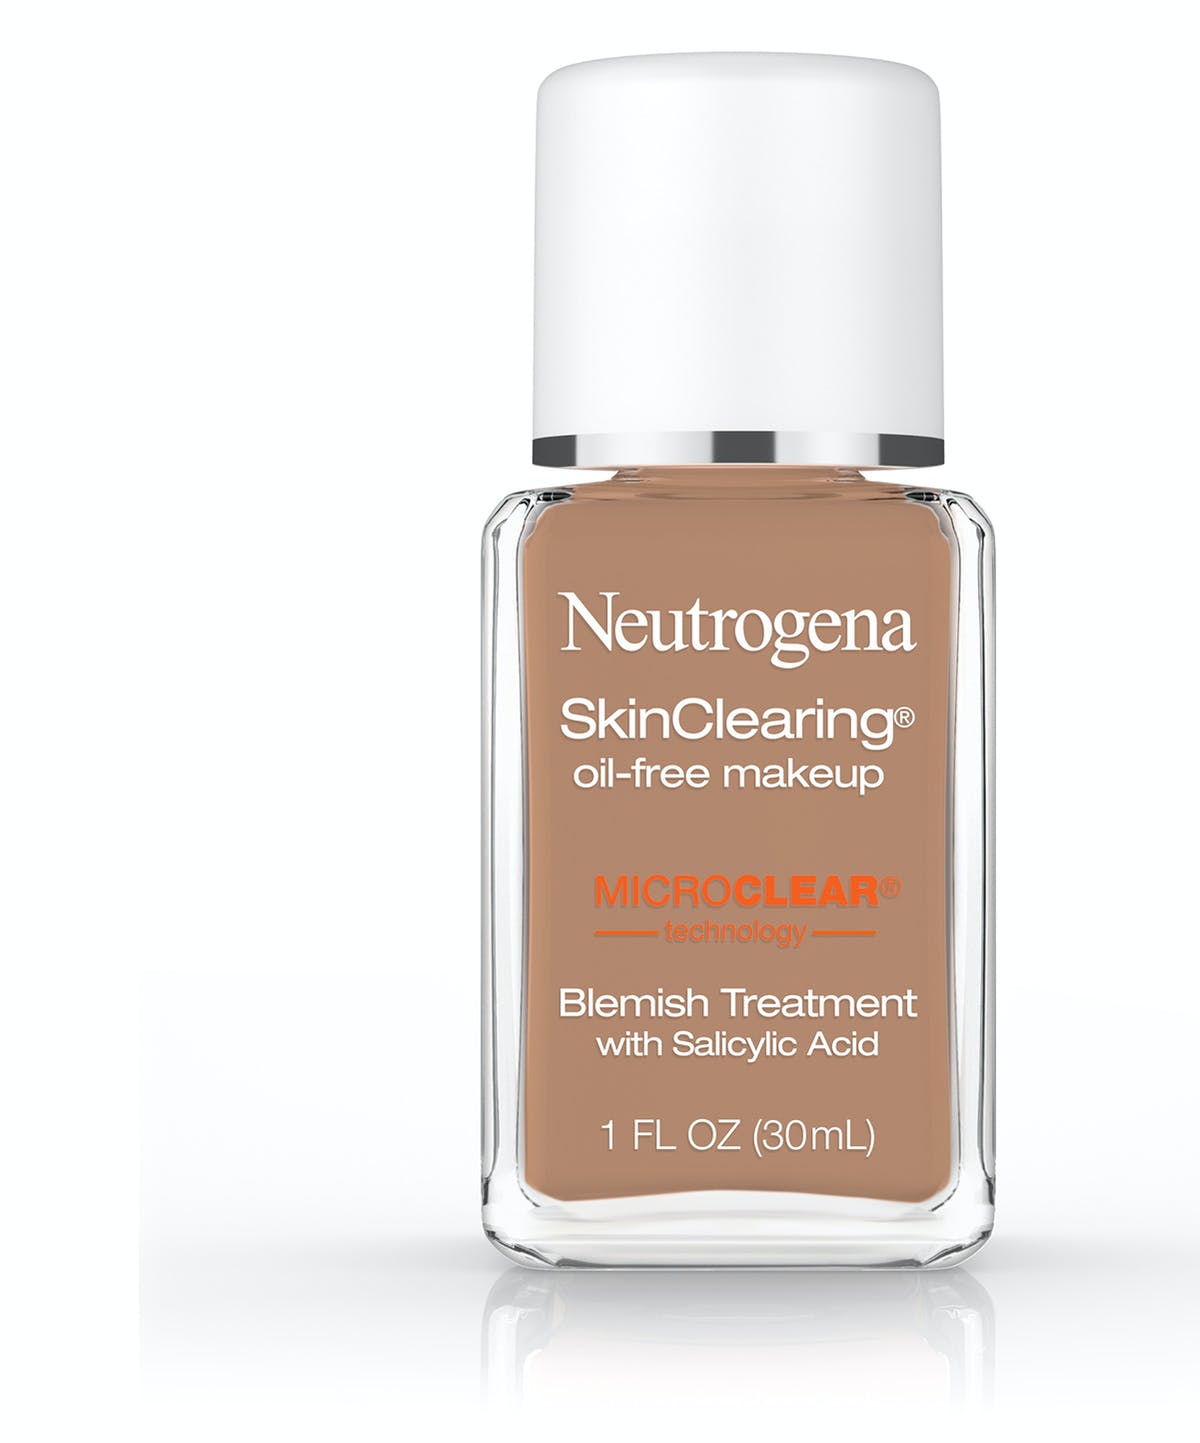 Neutrogena Skin Clearing Oil-Free Acne and Blemish Fighting Liquid Foundation with .5% Salicylic Acid Acne Medicine, Shine Controlling Makeup for Acne Prone Skin,1 fl. oz